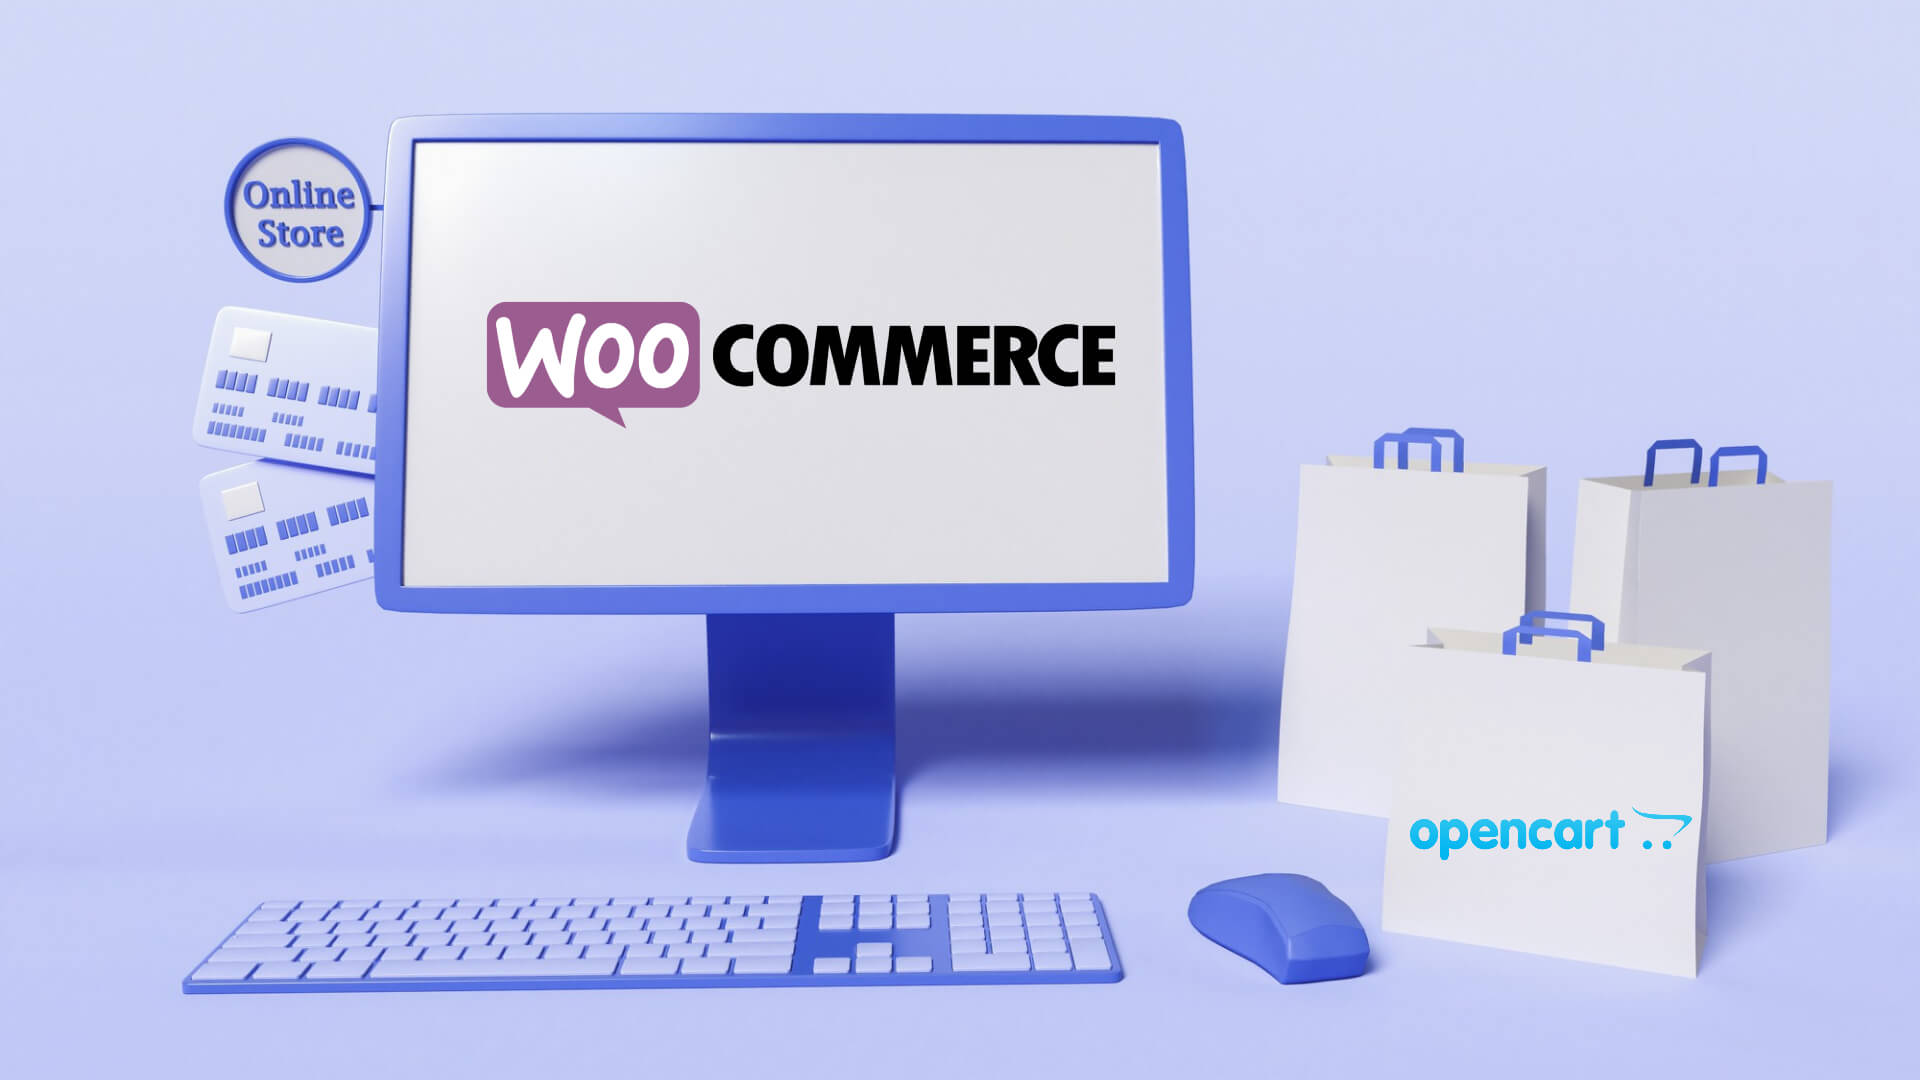 OpenCart vs WooCommerce: Which One Should You Choose?